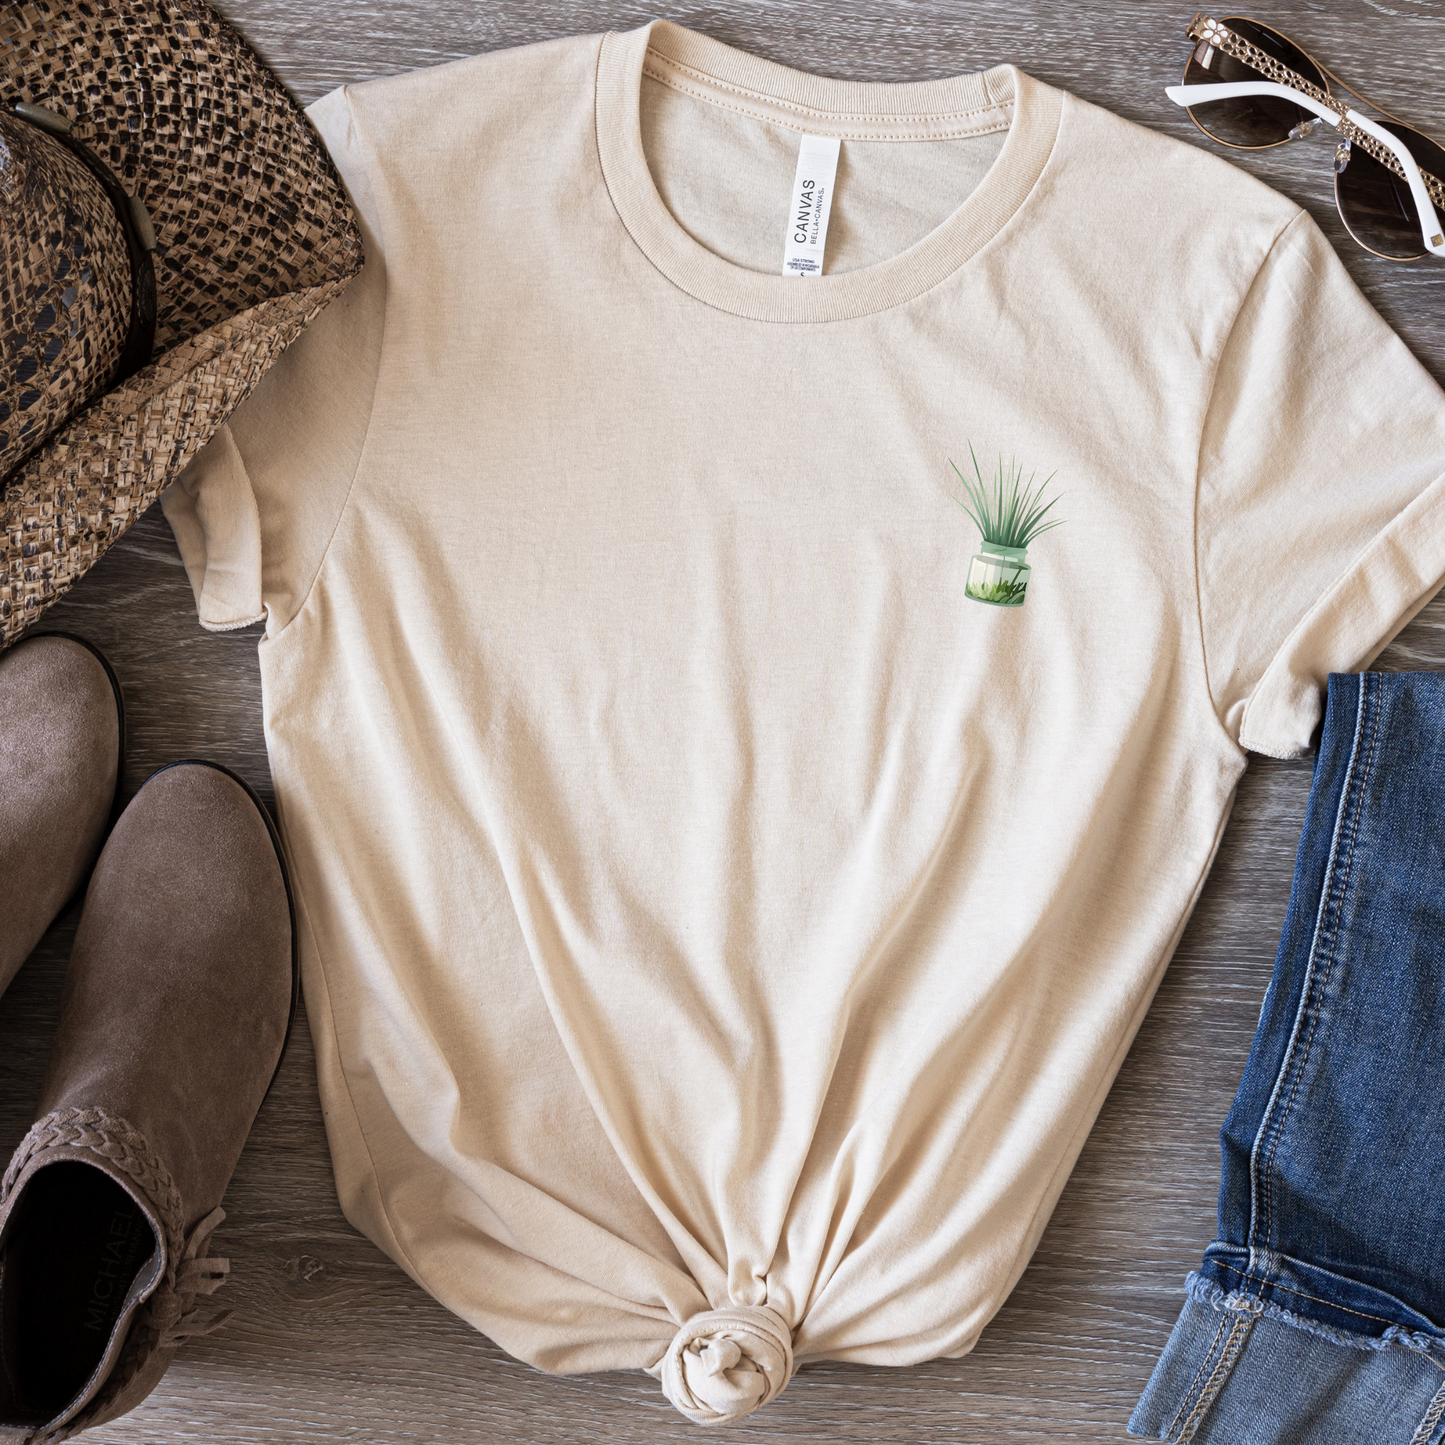 Grasses in Clear Planter Graphic Tee, Unisex Bella+Canvas